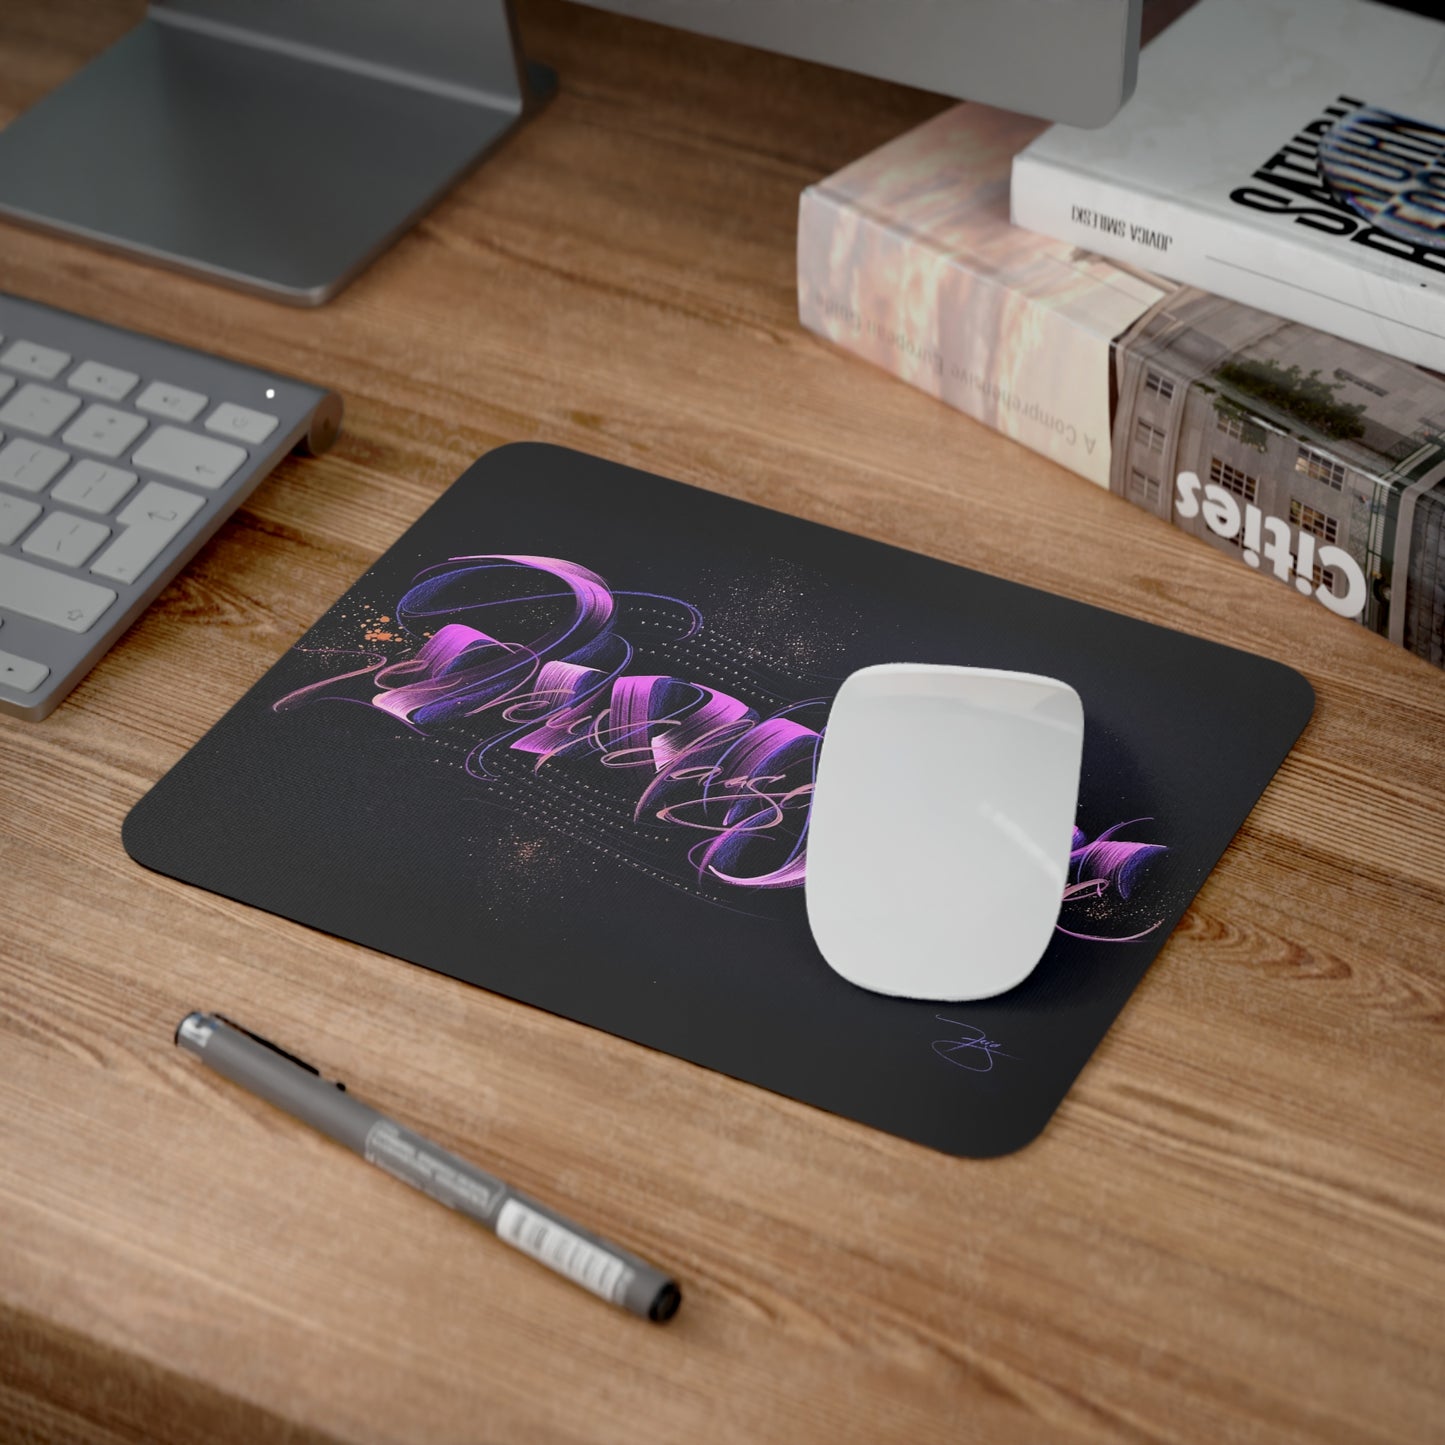 Mouse Pad - "I want to dance my life"